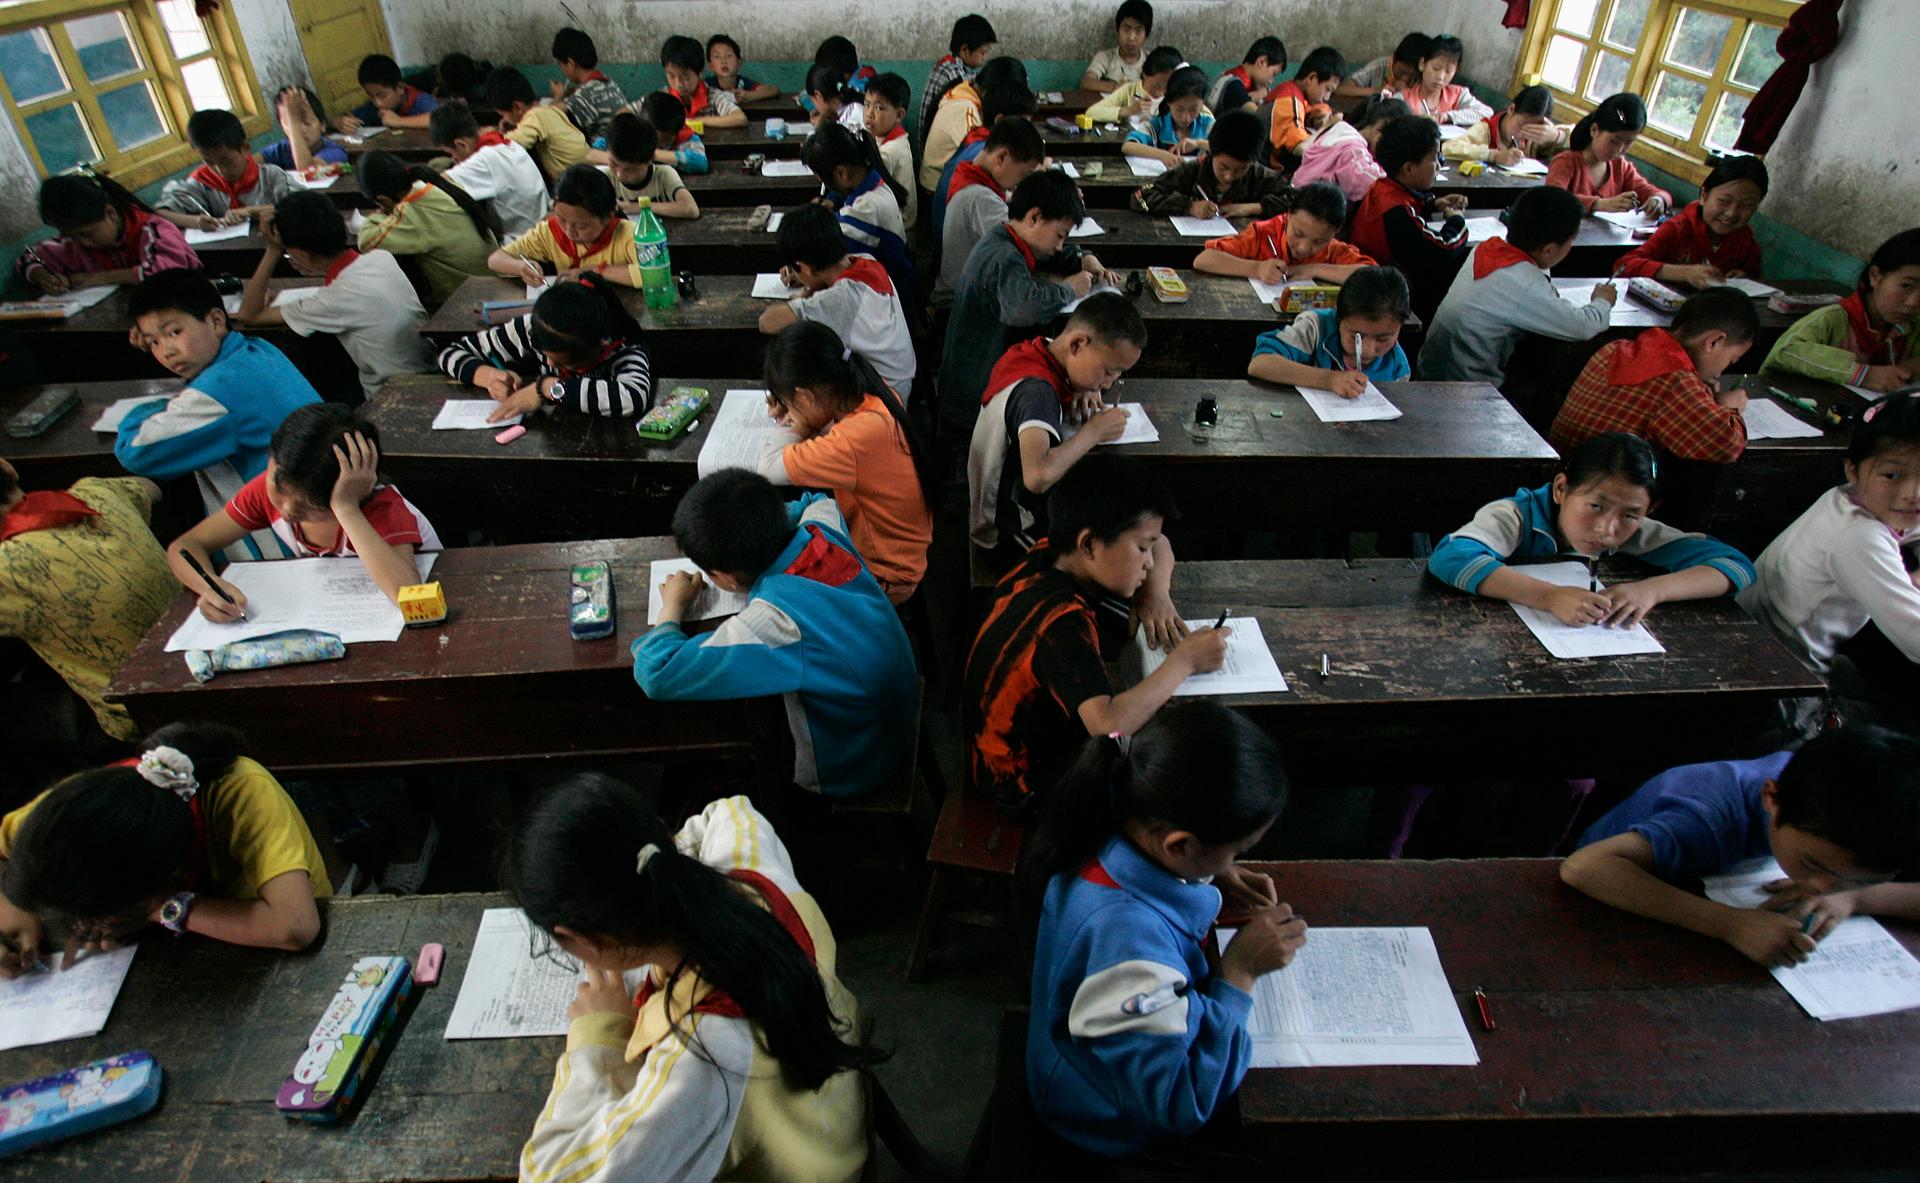 In China, the education system puts great emphasis on rote memorization. And students of all ages take lots and lots of exams. 